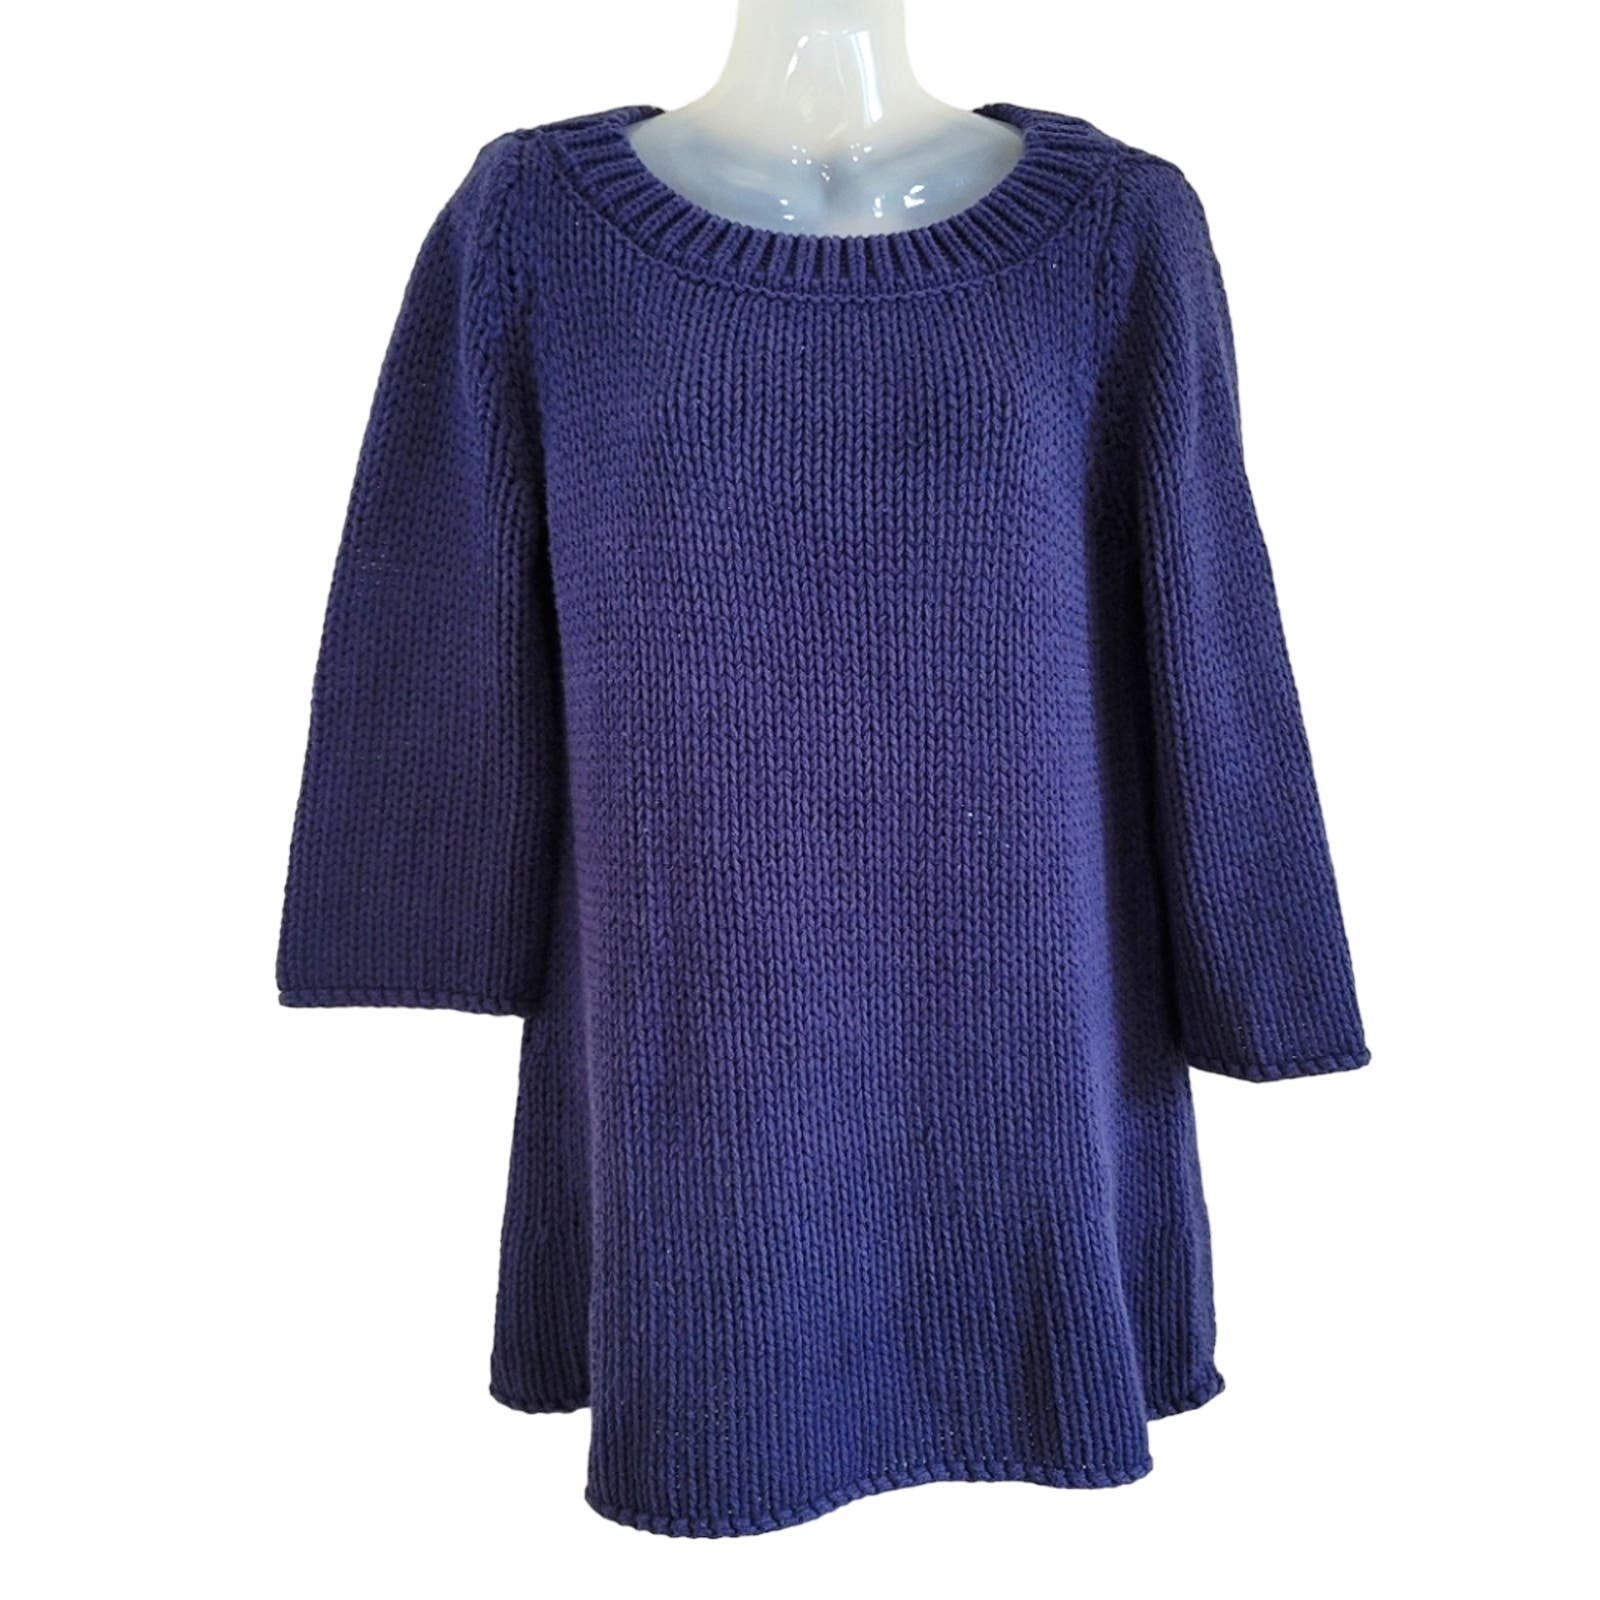 Discounted Soft Surroundings Open Loose Chunky Knit Swe